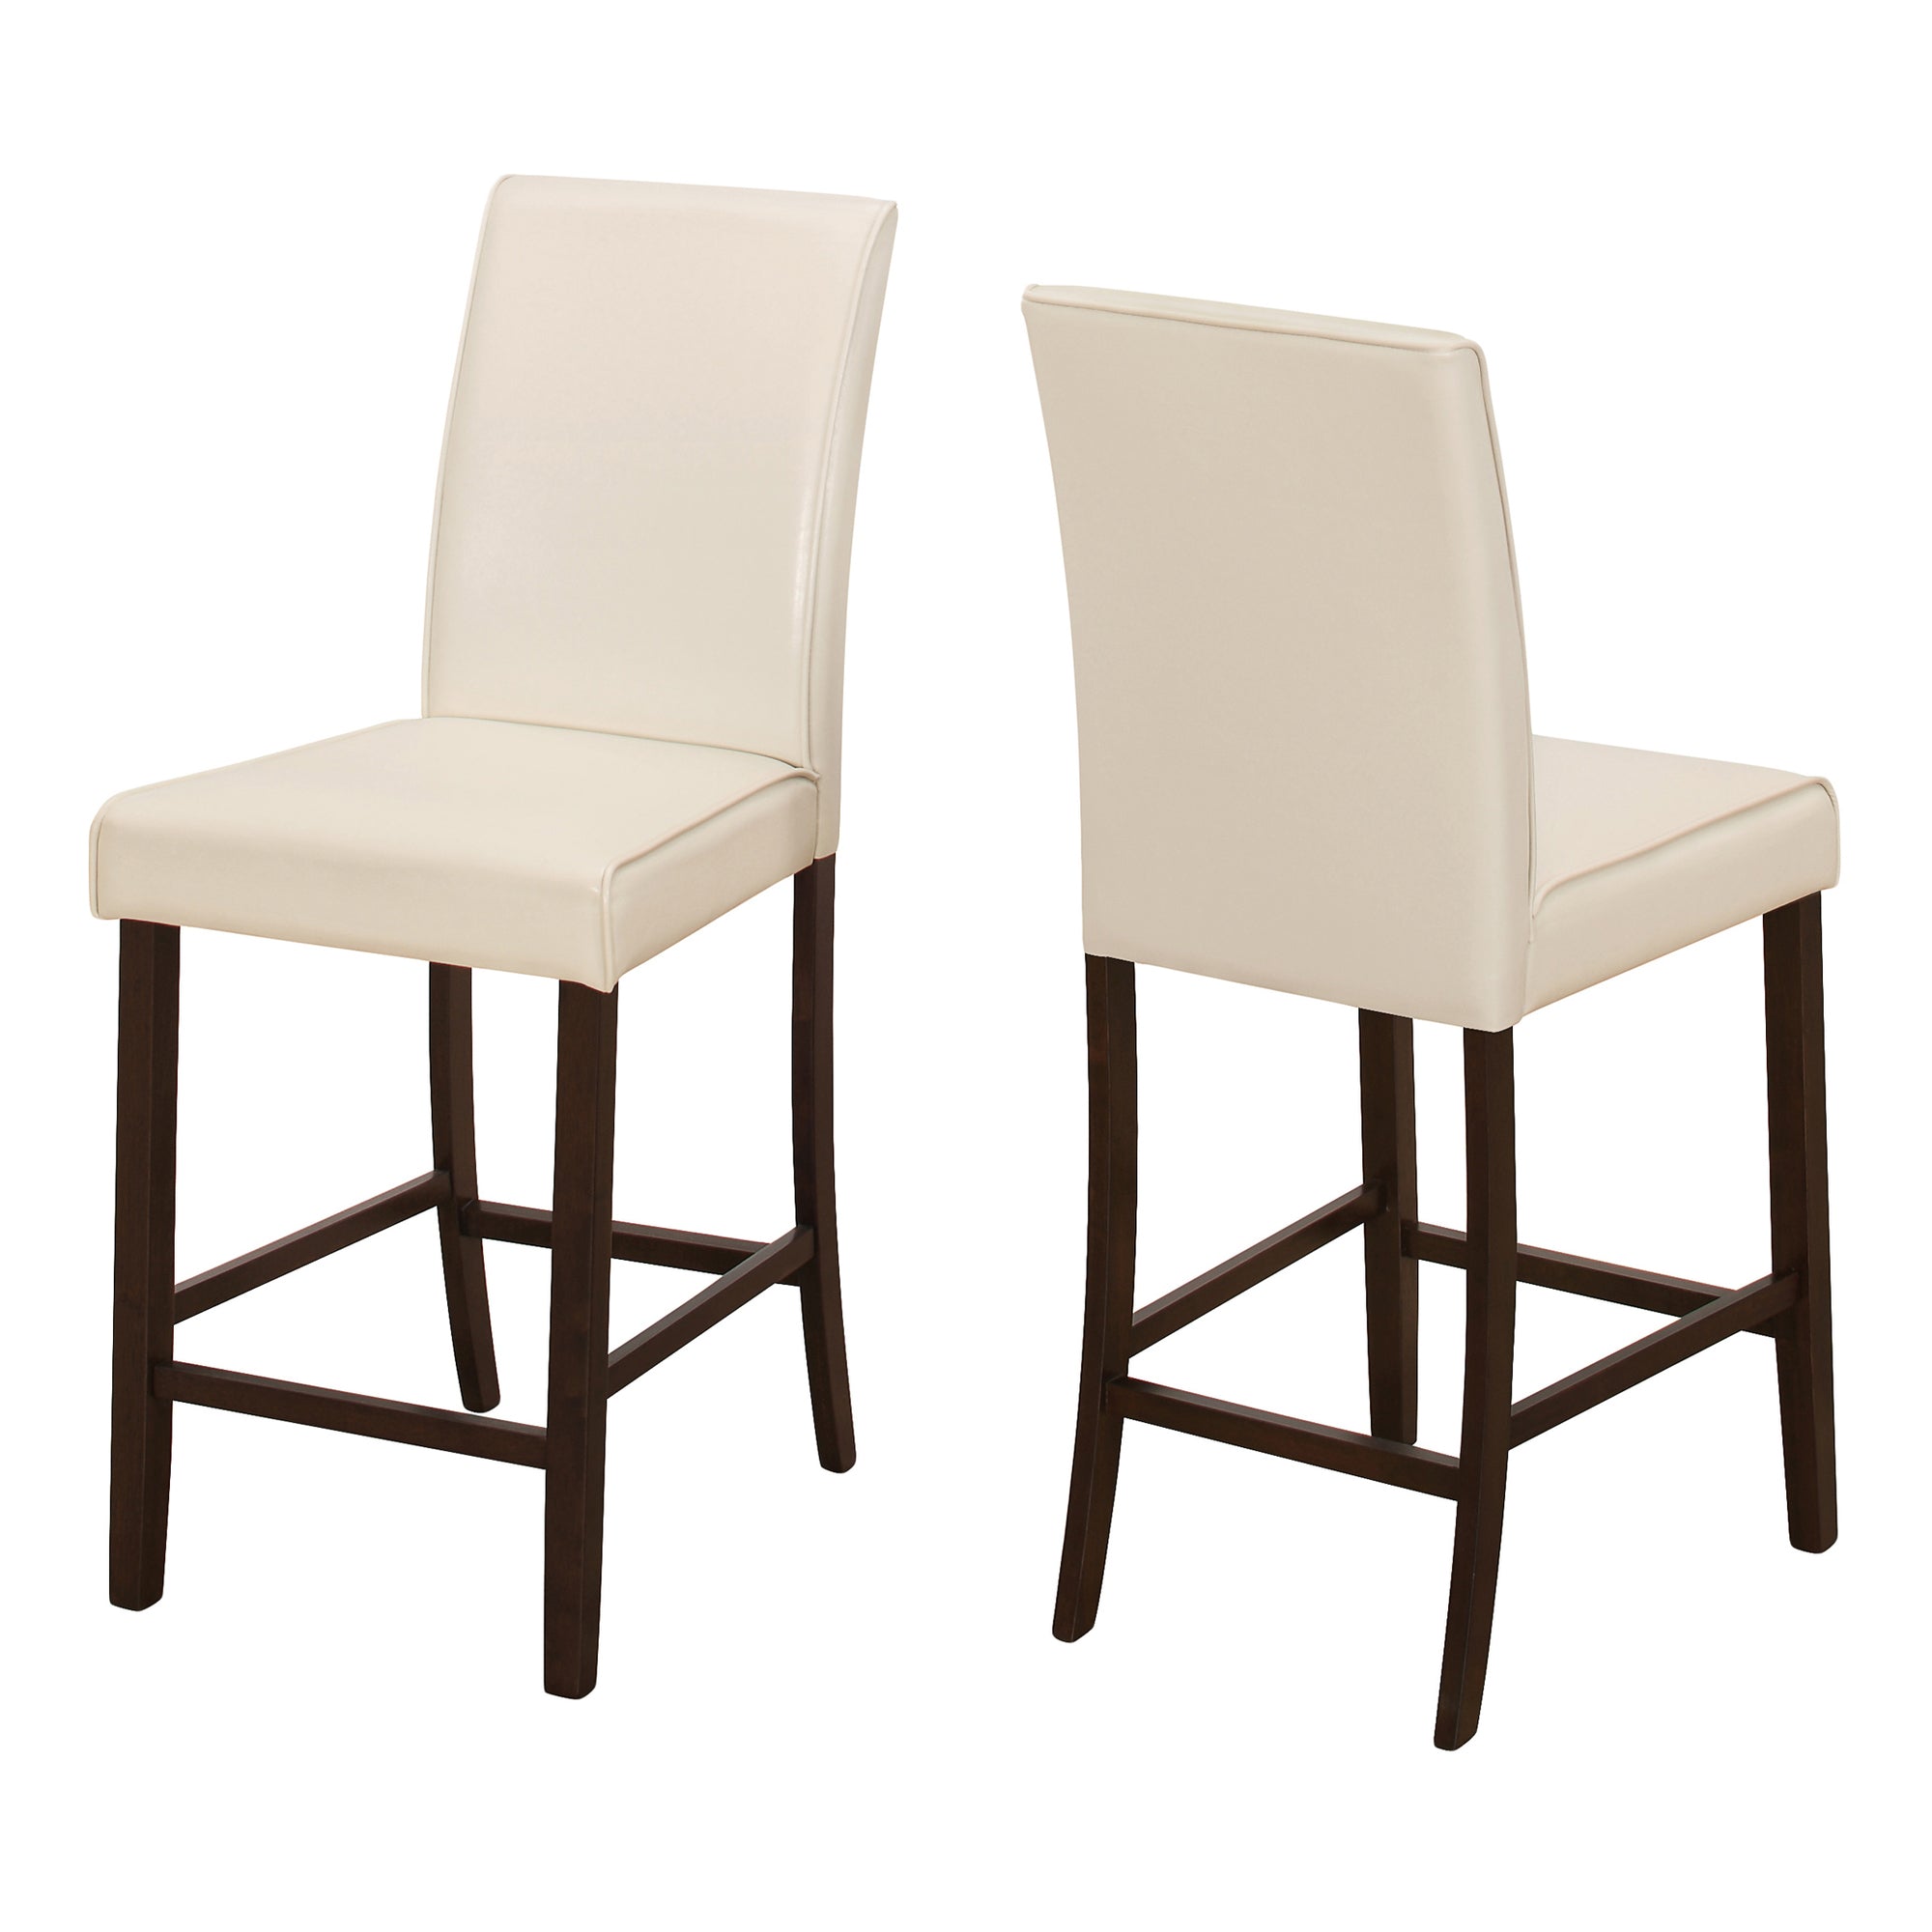 MN-431903    Dining Chair, Set Of 2, Counter Height, Pu Leather-Look, Upholstered, Wood Legs, Kitchen, Leather Look, Wooden Legs, Beige, Dark Brown, Contemporary, Modern